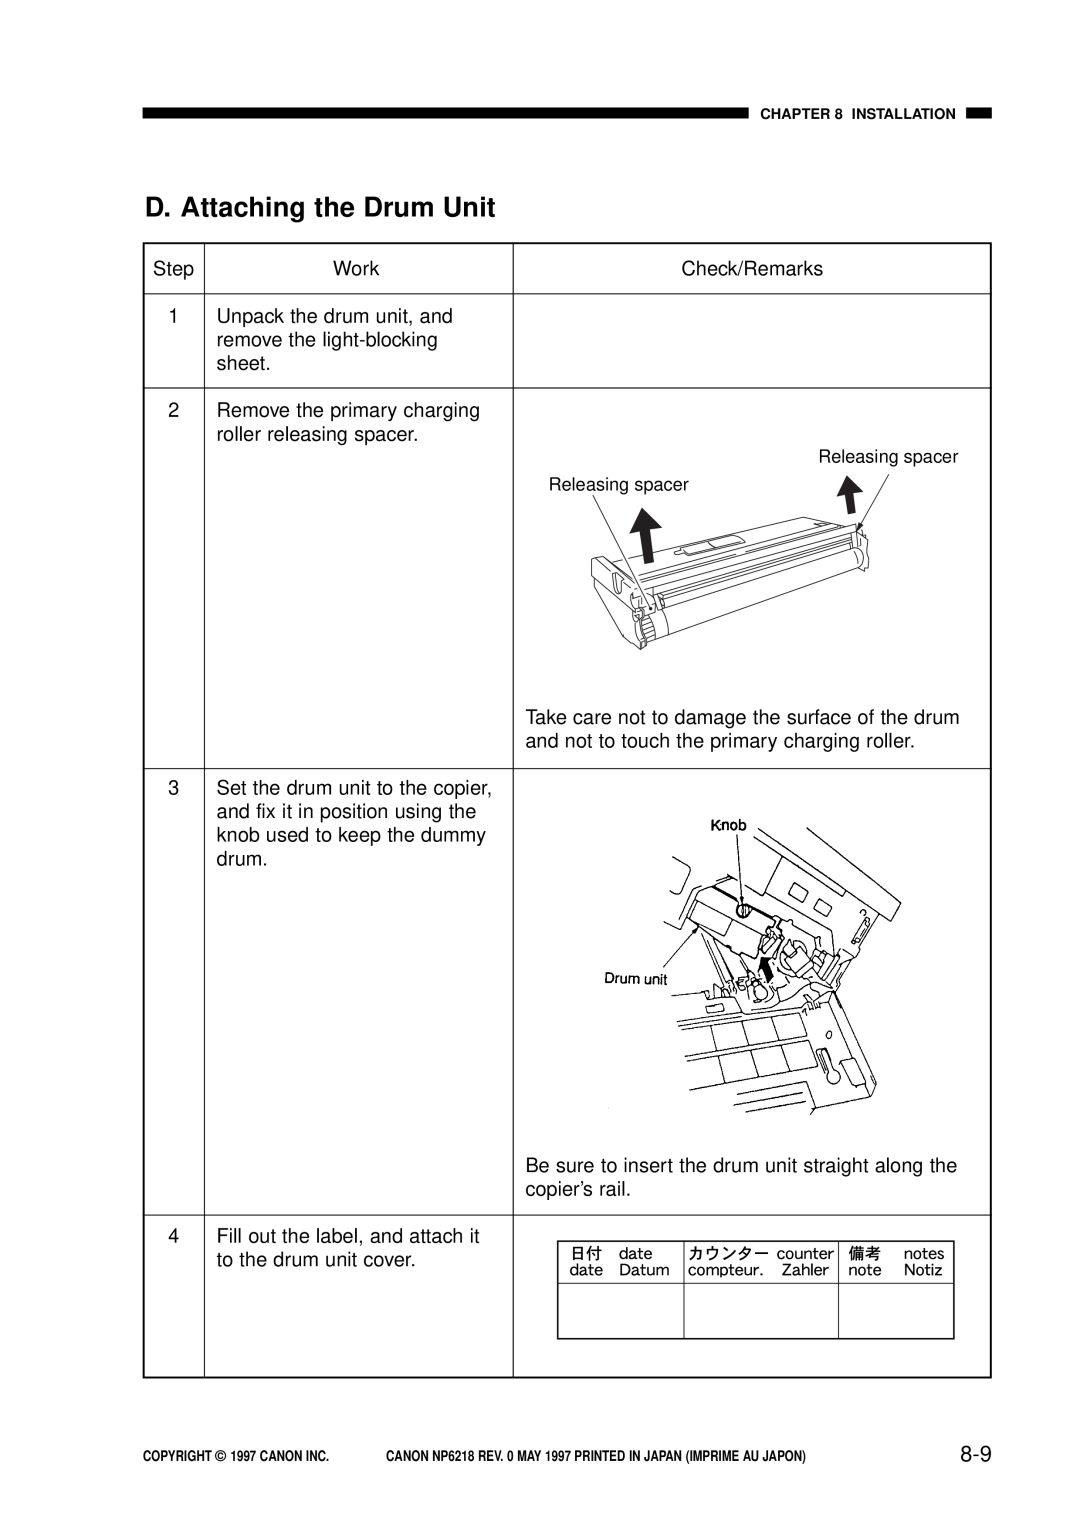 Canon FY8-13EX-000, NP6218 service manual D. Attaching the Drum Unit, Check/Remarks 